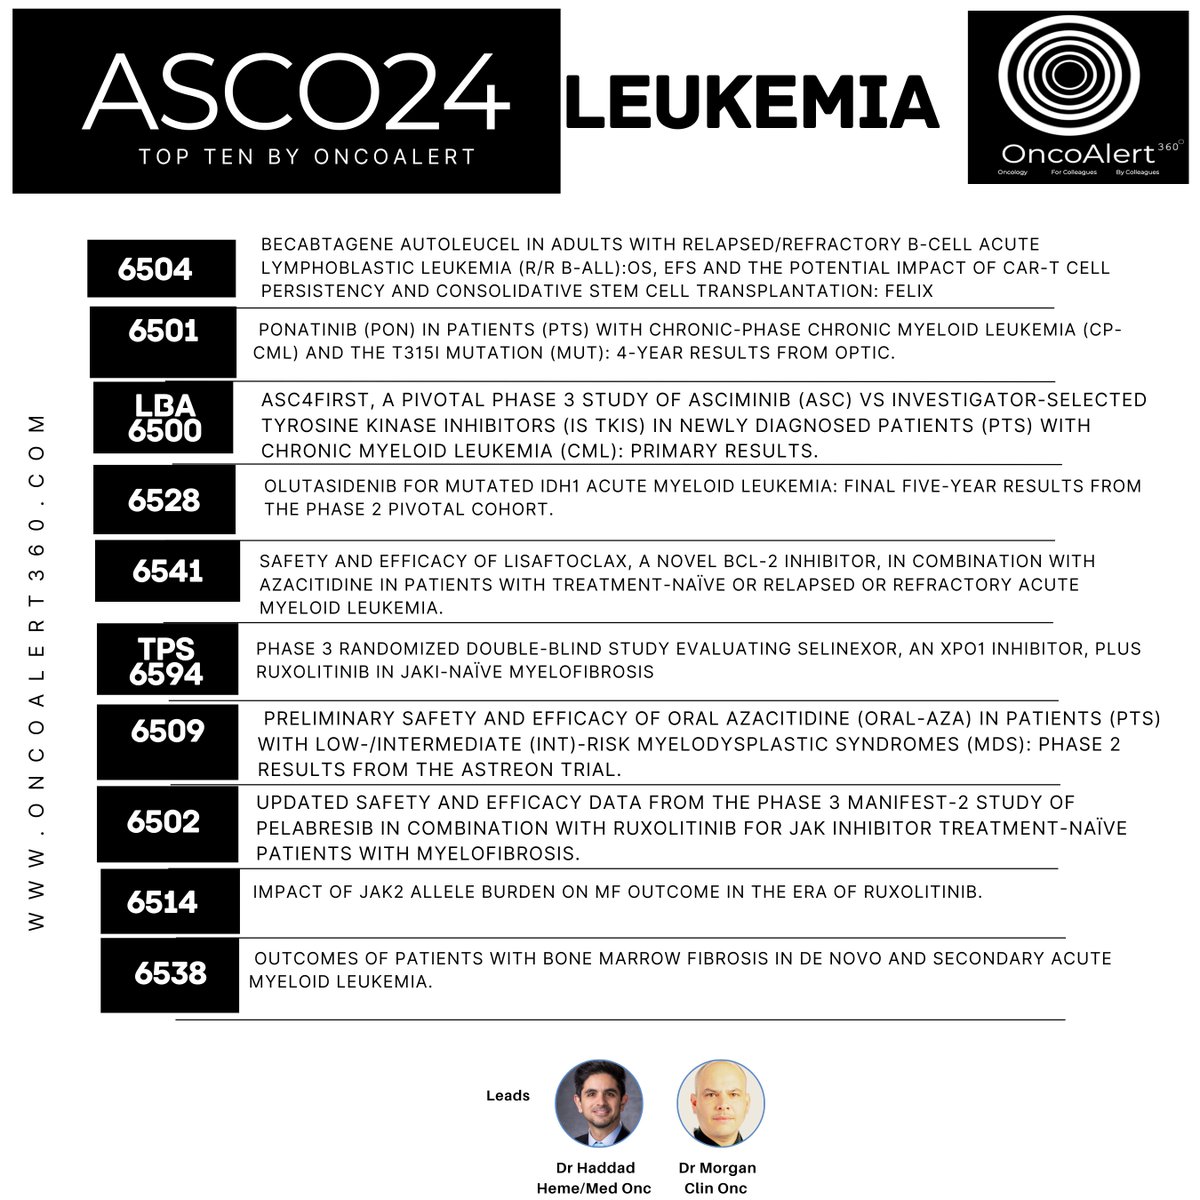 Dear Colleagues, 
The @OncoAlert 🚨Network Presents OUR Picks of TOP 🔟Abstracts to be Presented at #ASCO24 for #Leukemia 

This List Curated by @FadiHaddad_MD 🇺🇸 and @weoncologists 🇺🇸

Abstract #6504: Obecabtagene autoleucel (obe-cel, AUTO1) in adults with relapsed/refractory